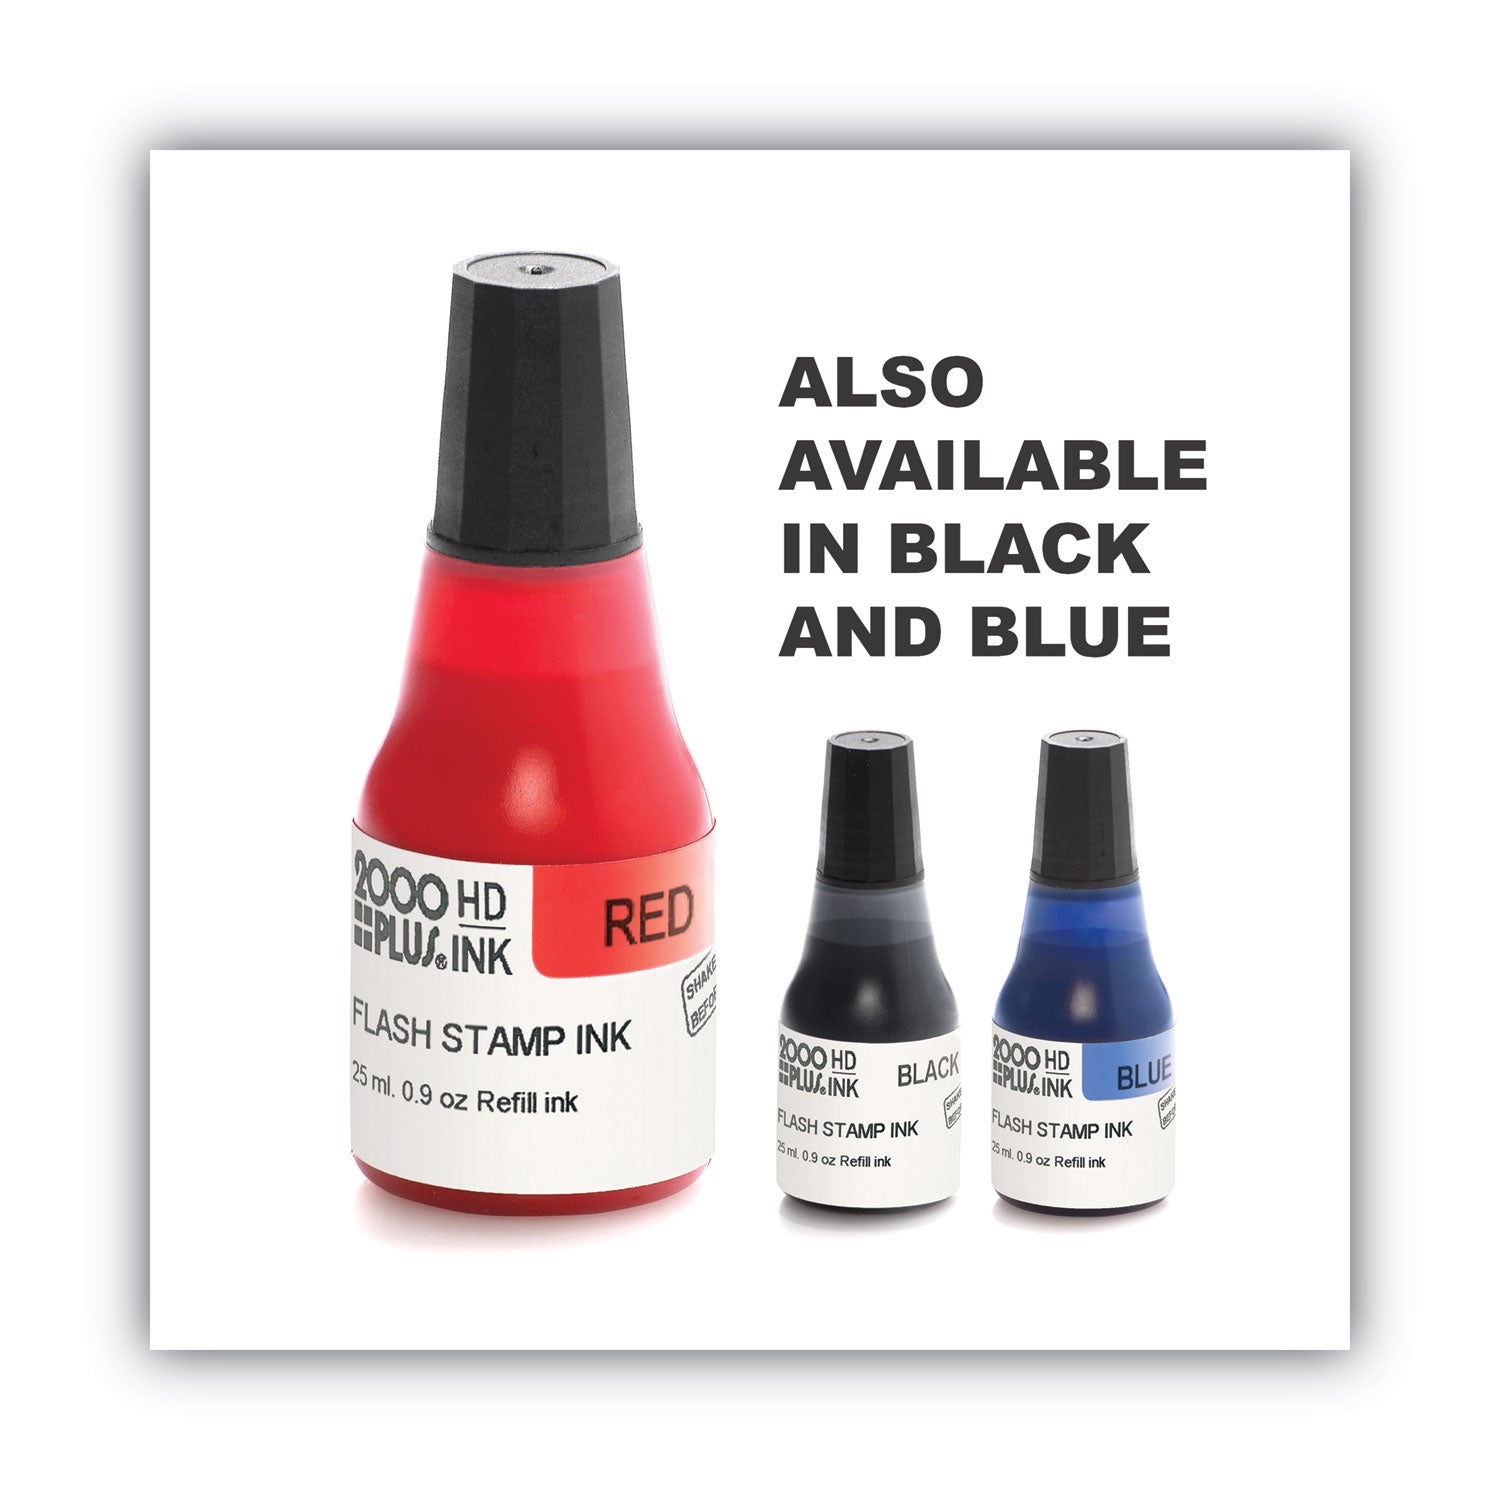 pre-ink-high-definition-refill-ink-red-09-oz-bottle-red_cos033958 - 4